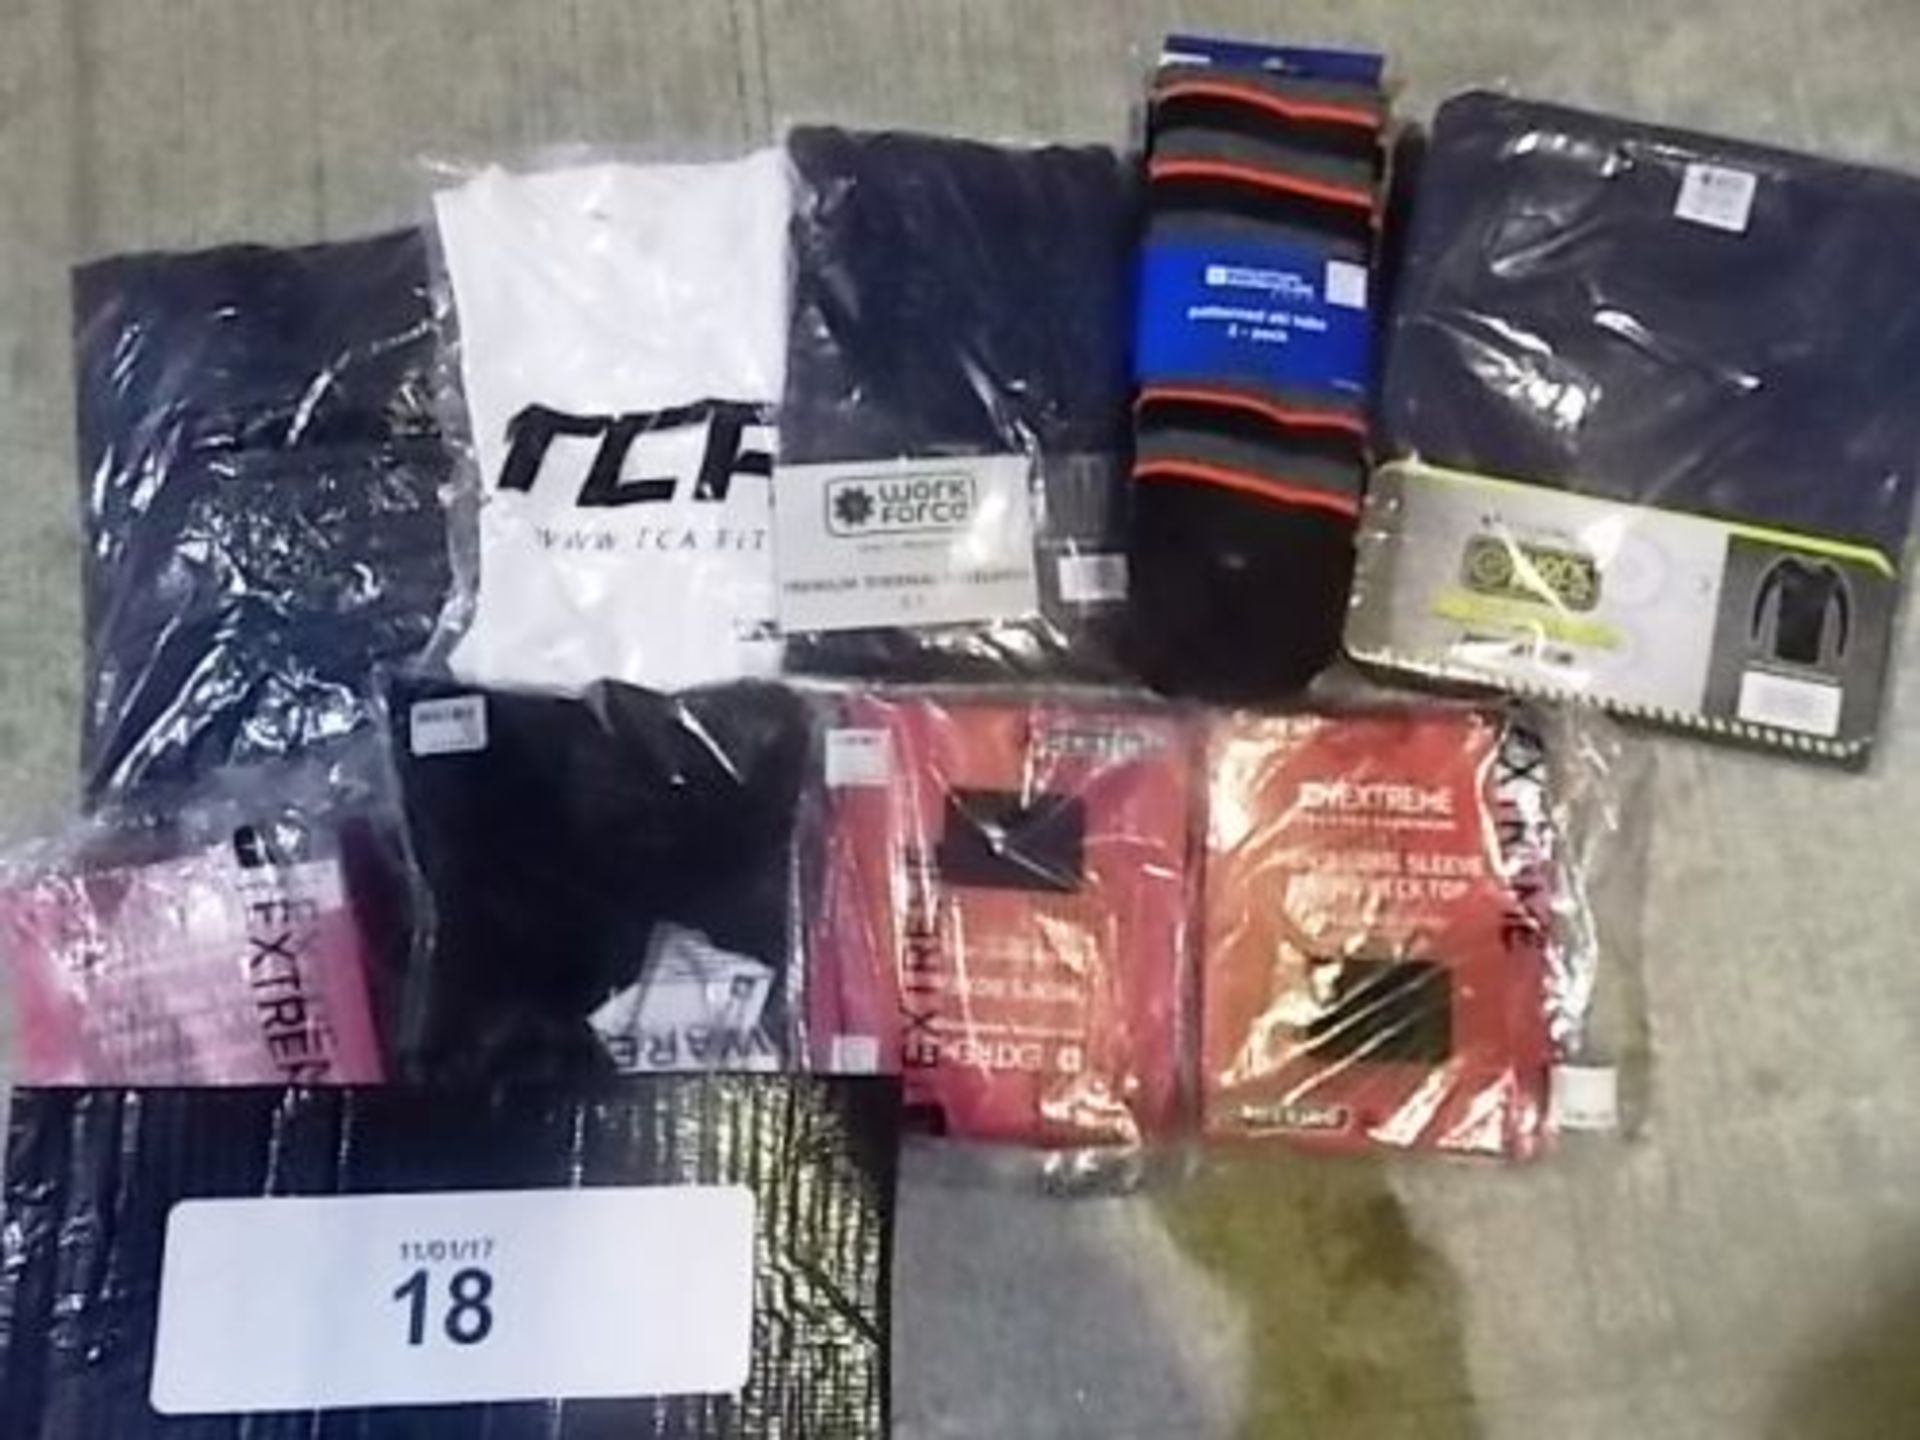 A good quantity of branded thermal wear including Mountain Warehouse and Workforce - New